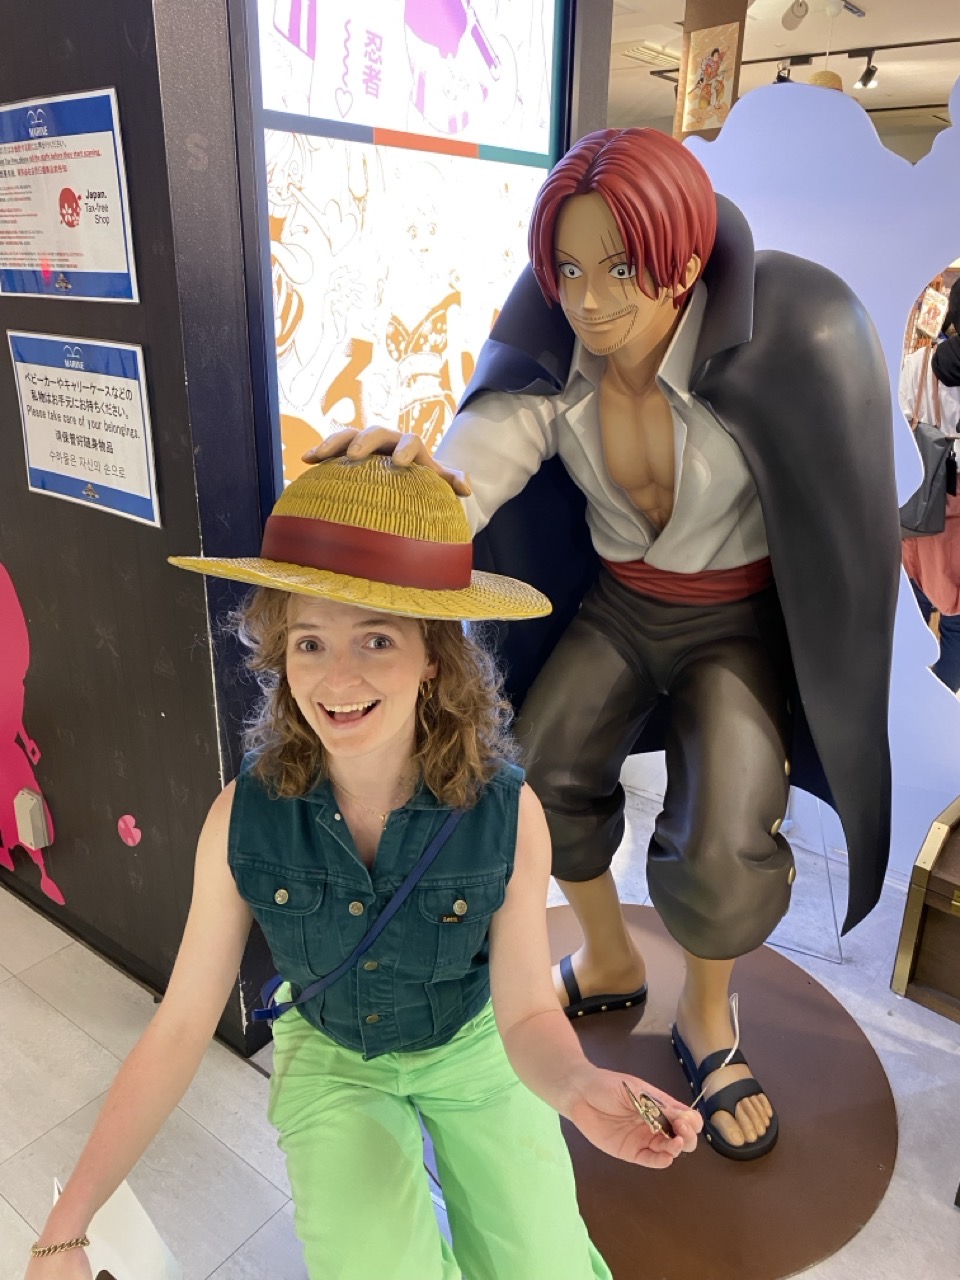 Lucy crouching under a state of a One Piece character putting a straw hat on her head